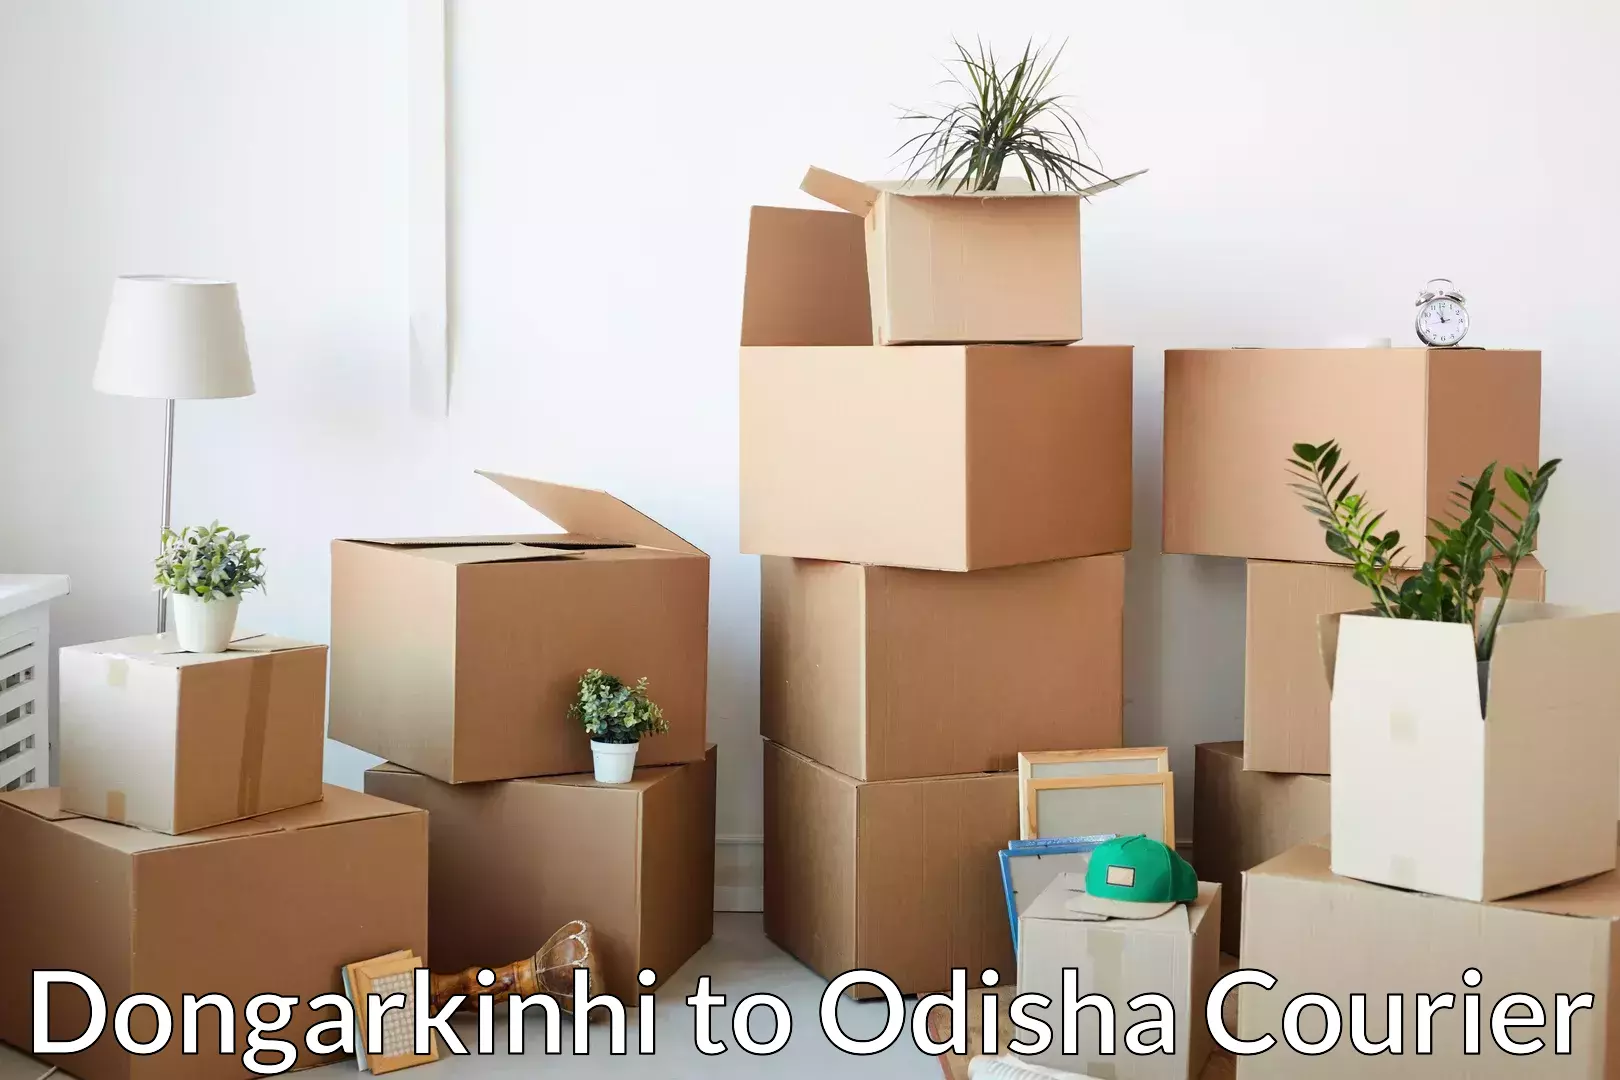 Affordable relocation services Dongarkinhi to Komana